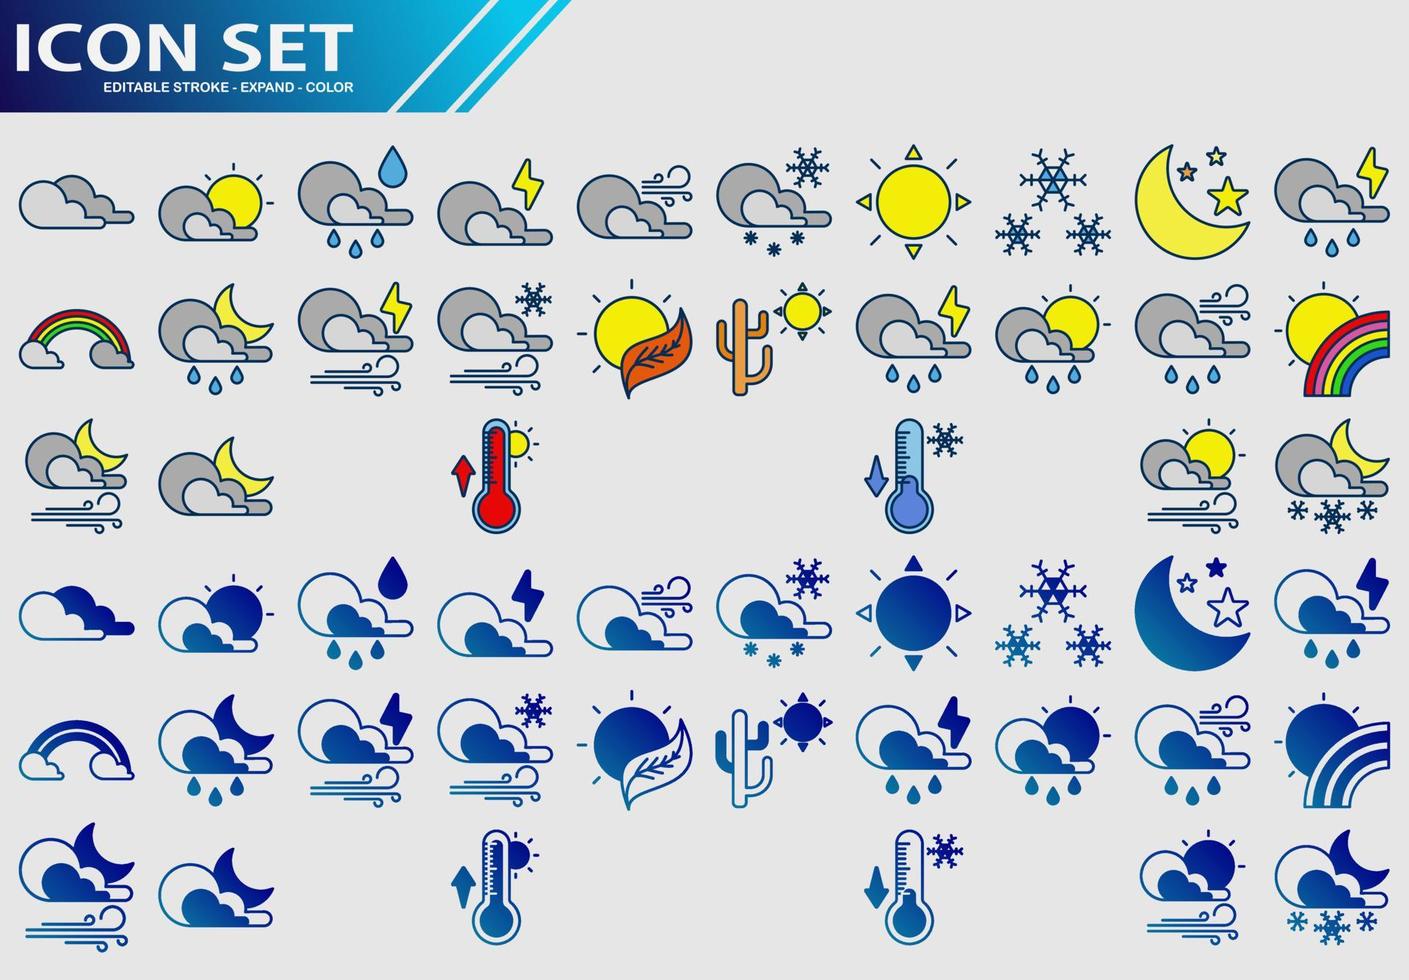 icon set contains various weather vector